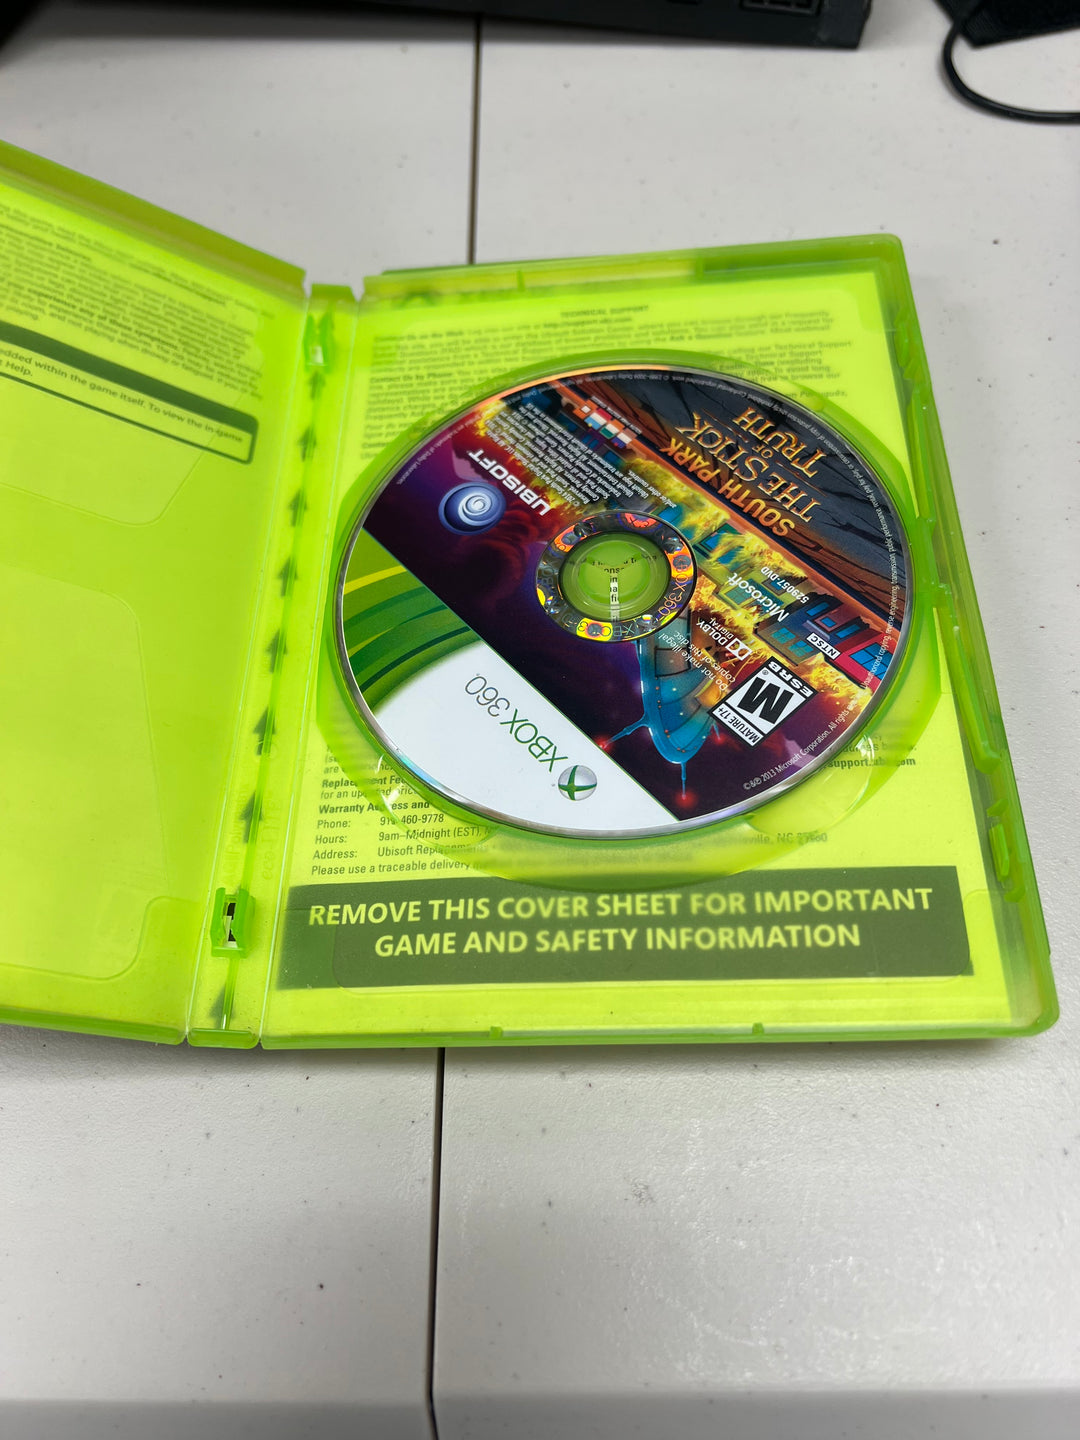 South Park the Stick of Truth for Microsoft Xbox 360 in case. Tested and working.     DO61024